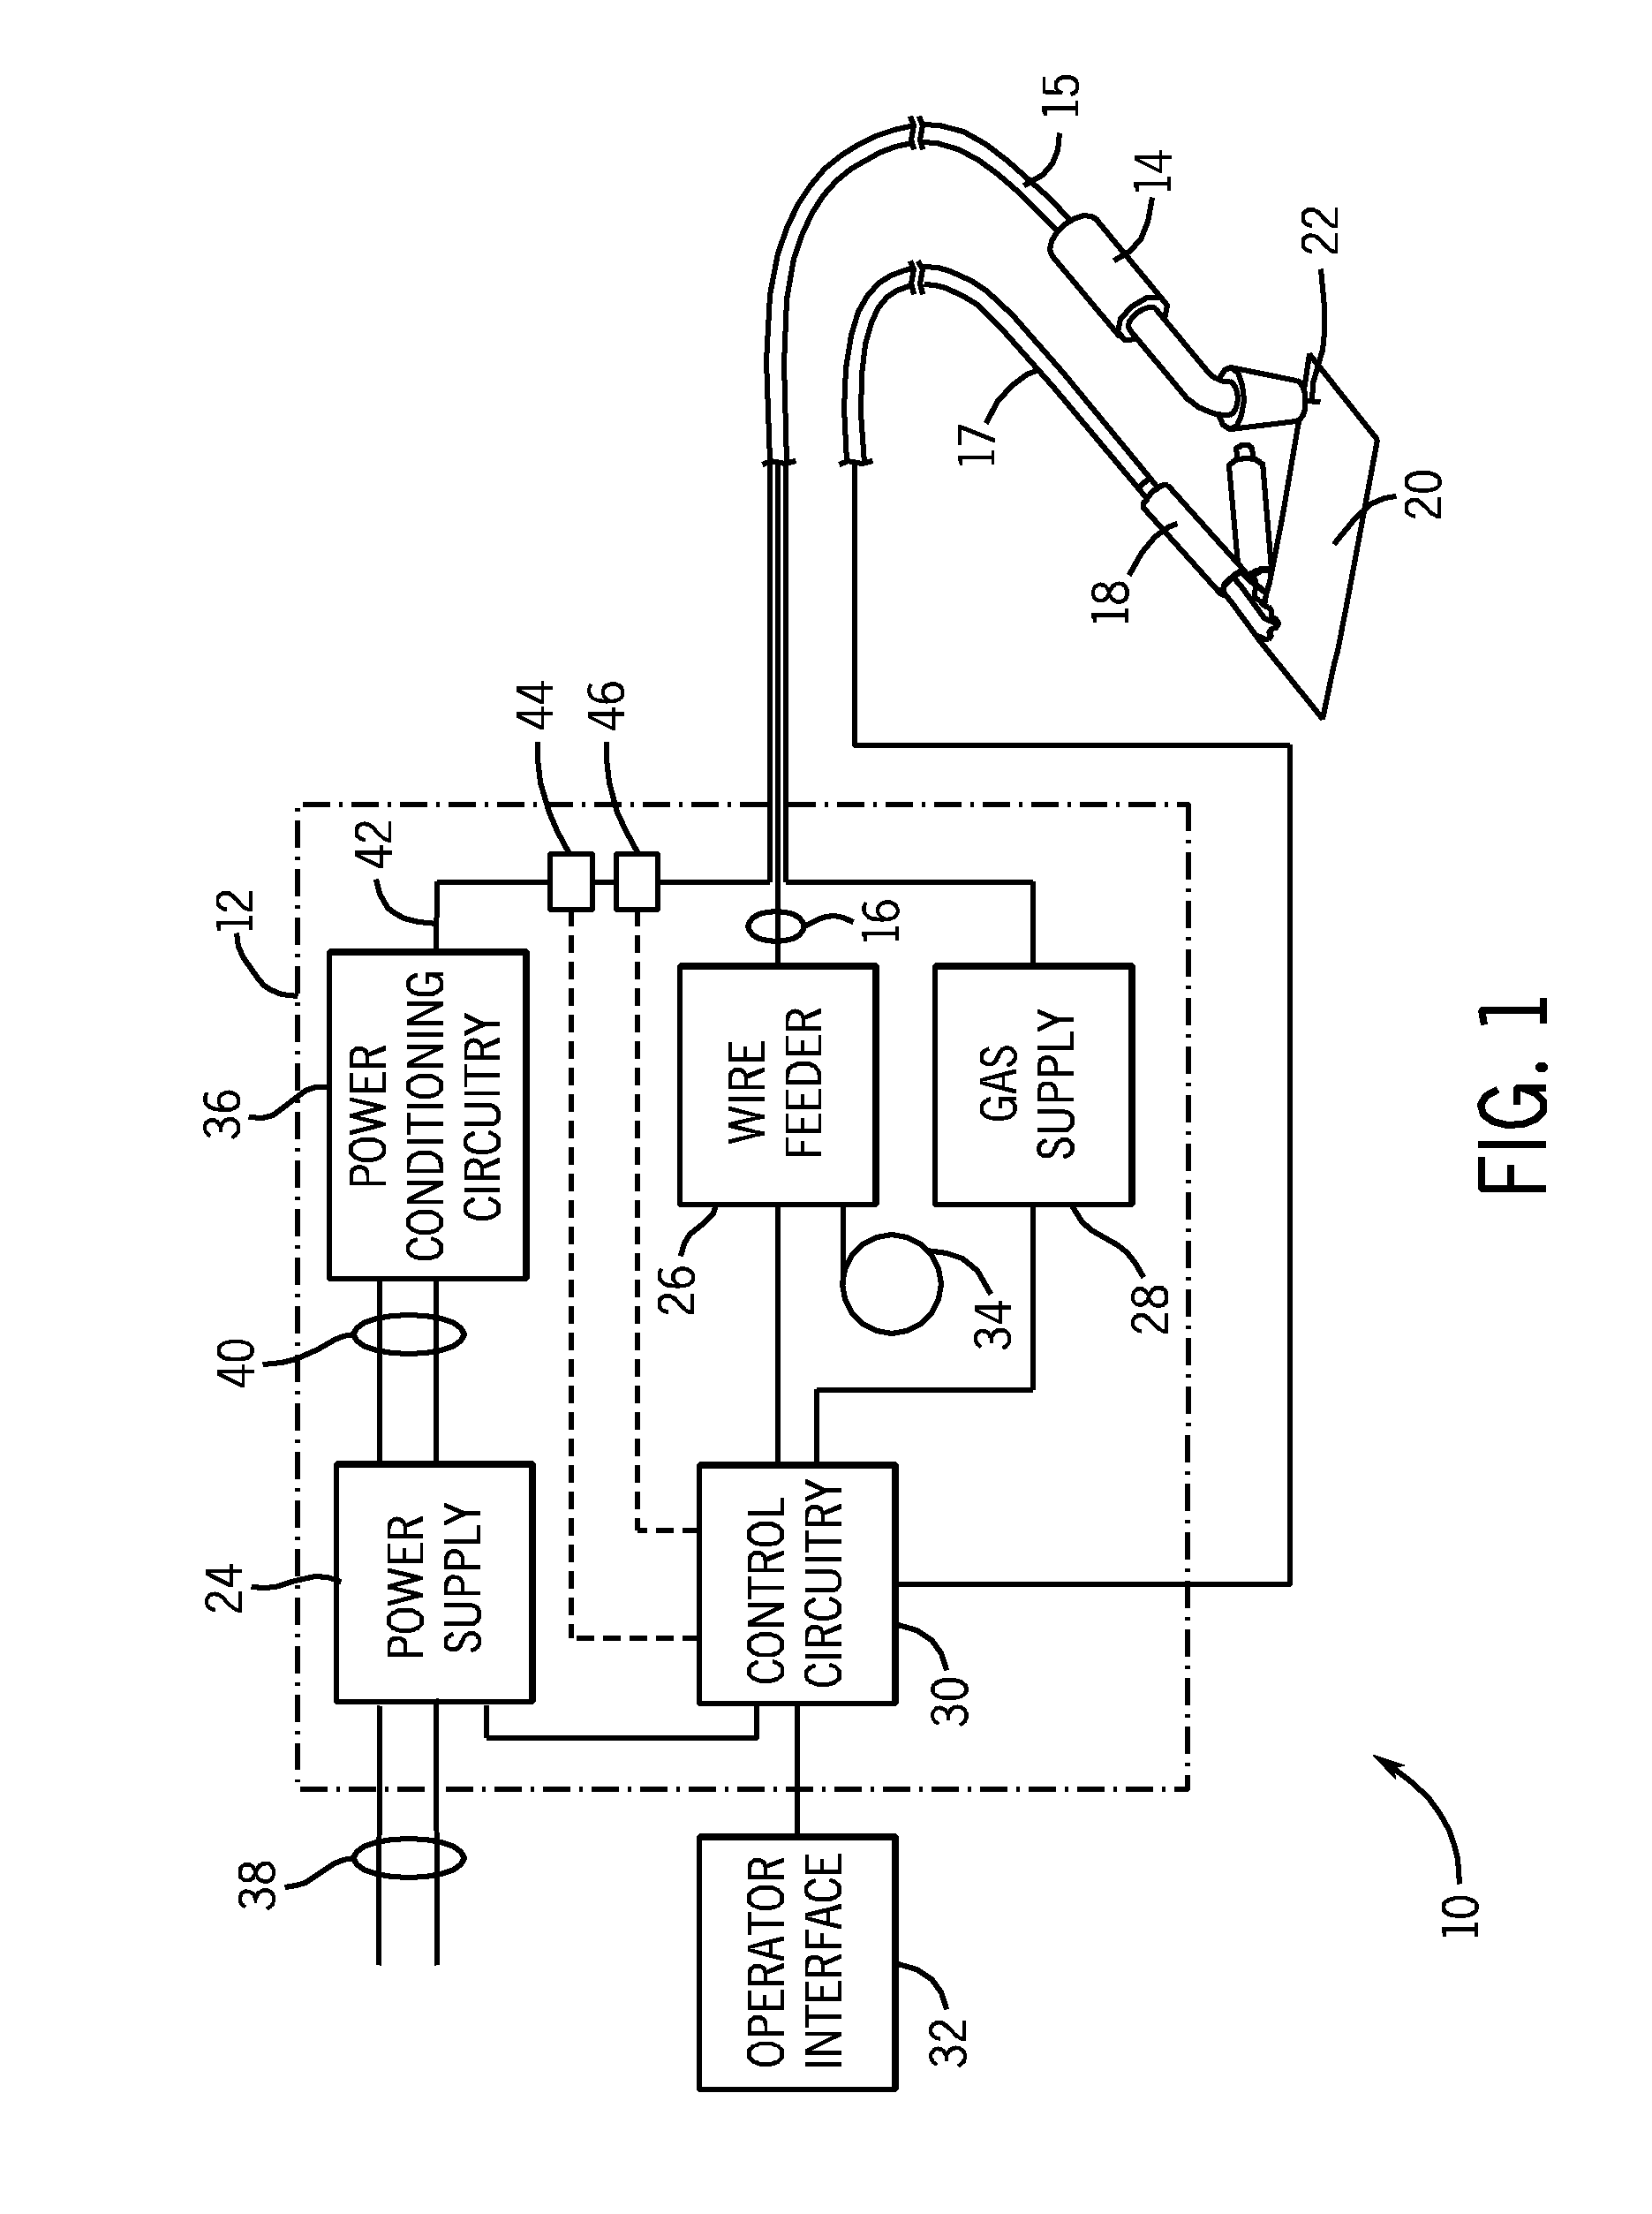 Constant voltage welder capacitor ripple current reduction method and system